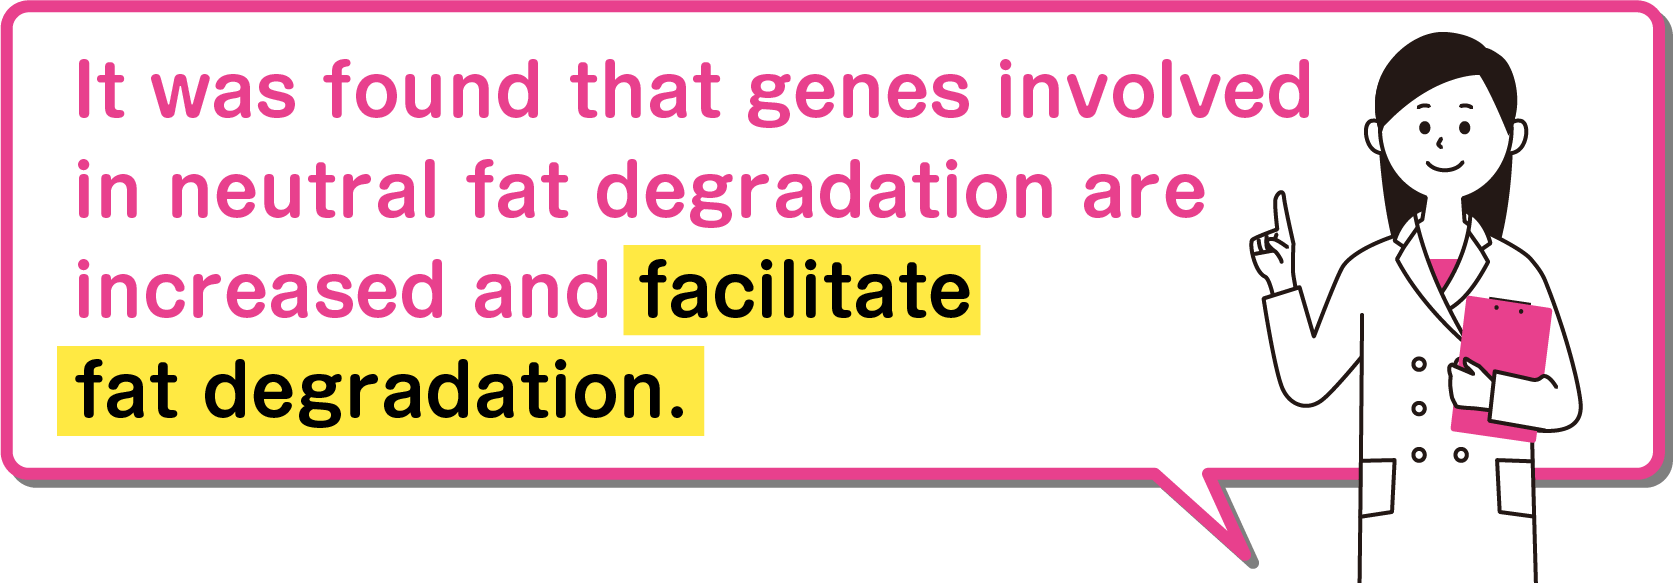 It was found that genes involved in neutral fat degradation are increased and facilitate fat degradation.